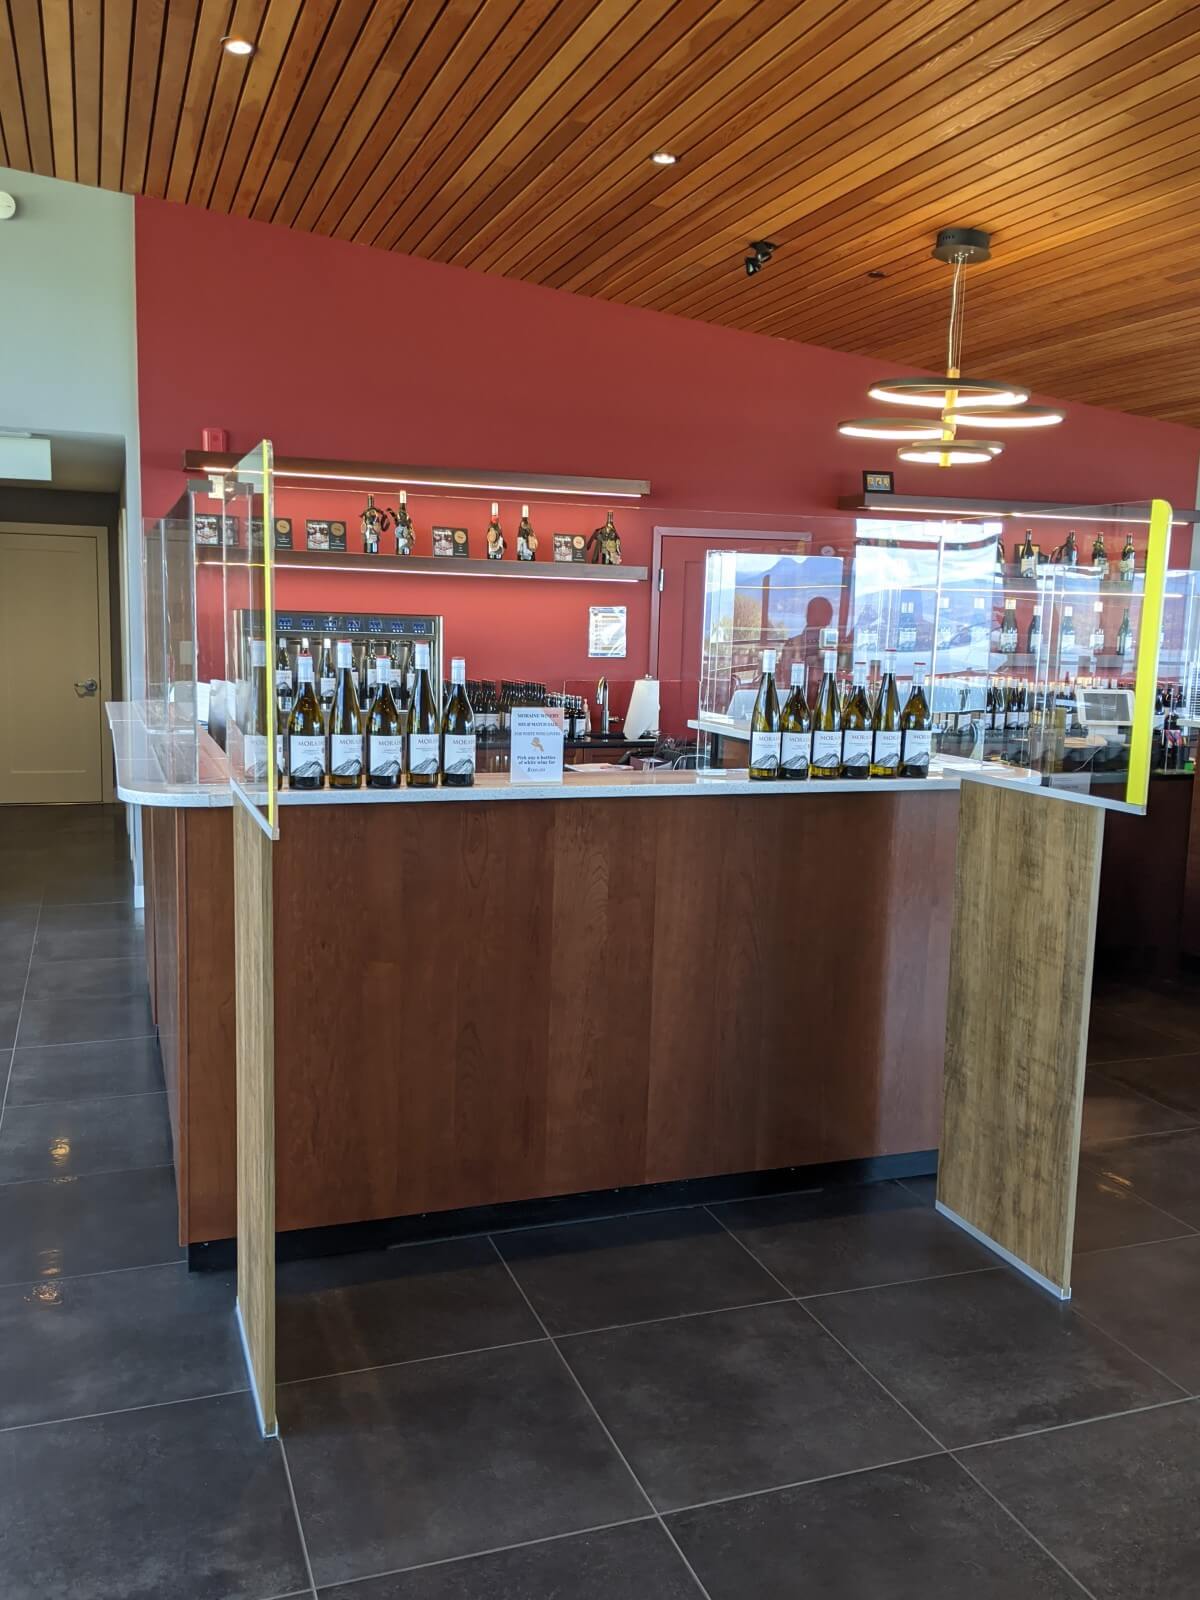 Front view of inside tasting bar at Moraine Winery, with wooden ceiling, red painted wall and wooden counter. The sides of the counter have plexiglass barriers. There are twelve bottles of wine lined up on the counter